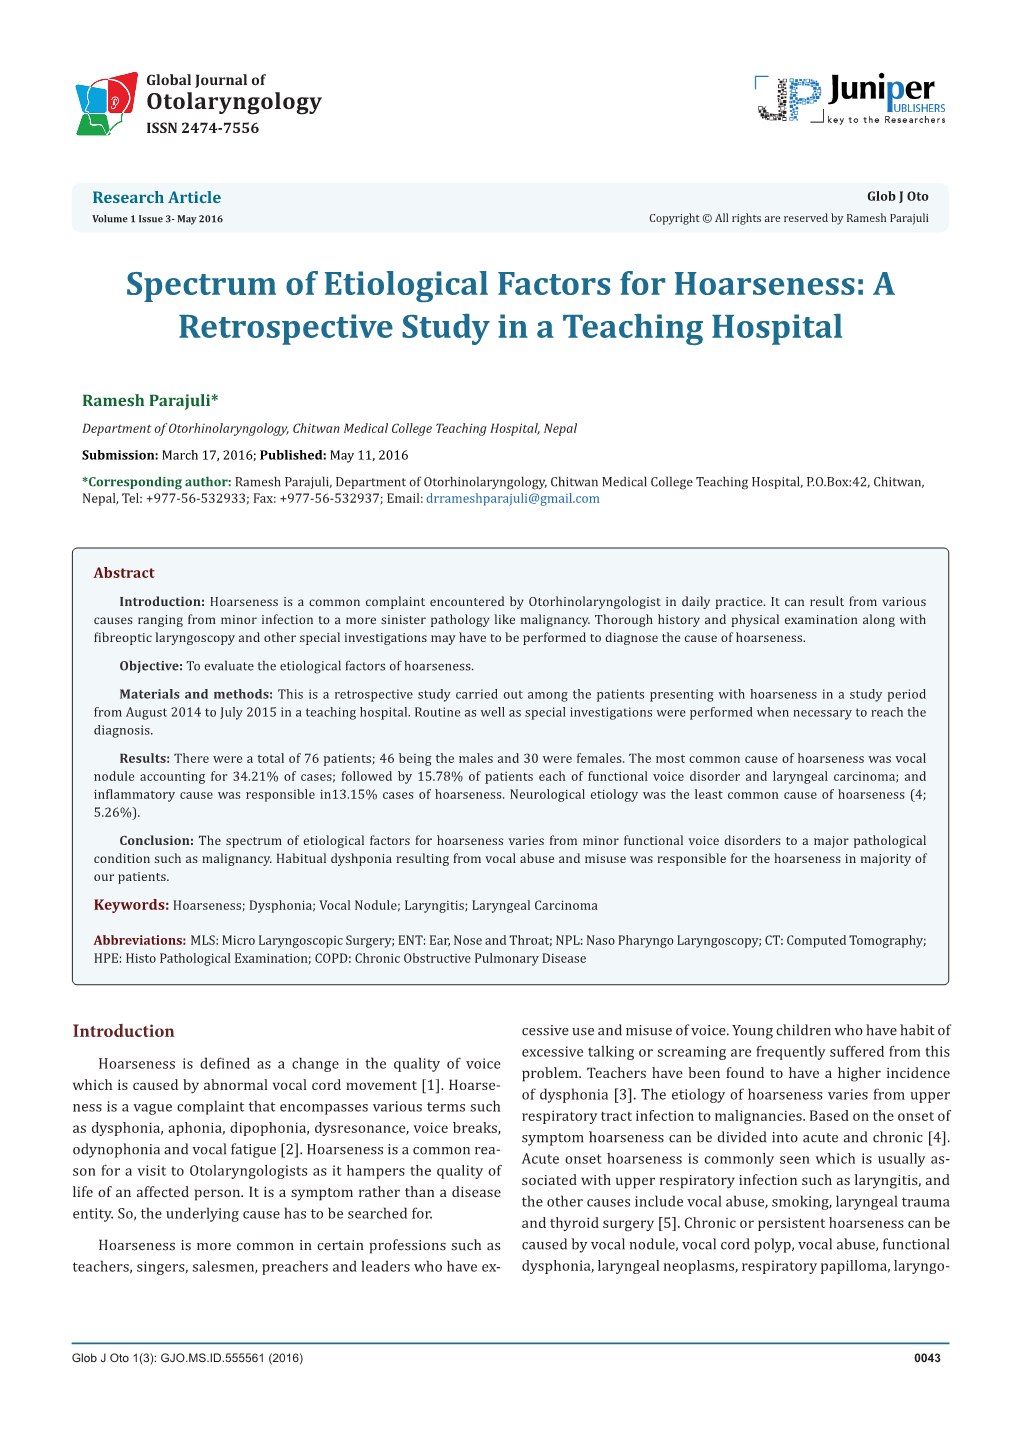 Spectrum of Etiological Factors for Hoarseness: a Retrospective Study in a Teaching Hospital